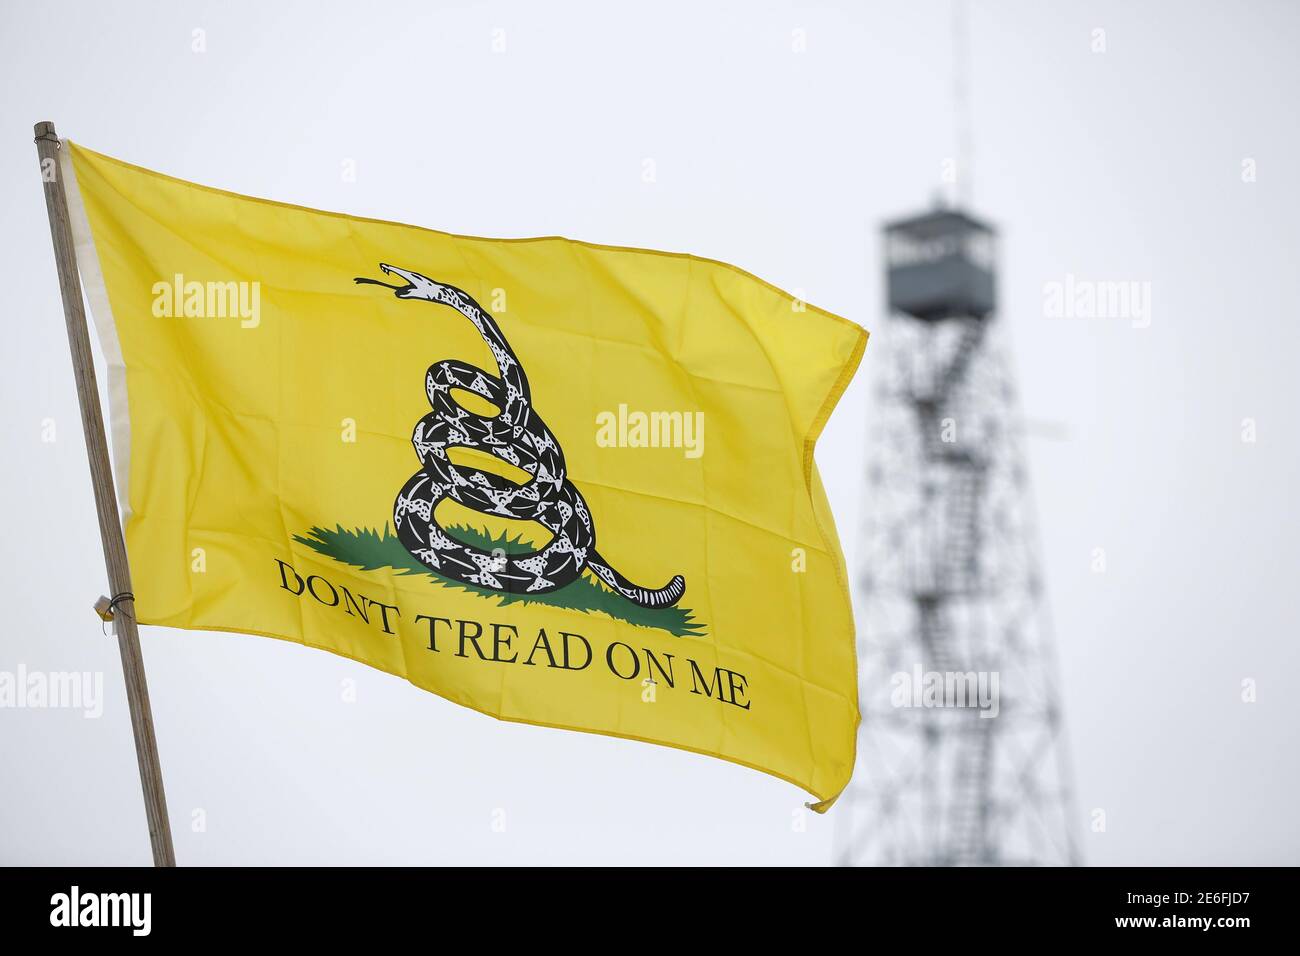 A Gadsden flag flies at the Malheur National Wildlife Refuge near Burns, Oregon, January 10, 2016. Members of self-styled militia groups met on Friday with armed protesters occupying the federal wildlife refuge in Oregon, pledging support for their cause, if not their methods, and offering to act as a peace-keeping force in the week-long standoff over land rights. REUTERS/Jim Urquhart Stock Photo